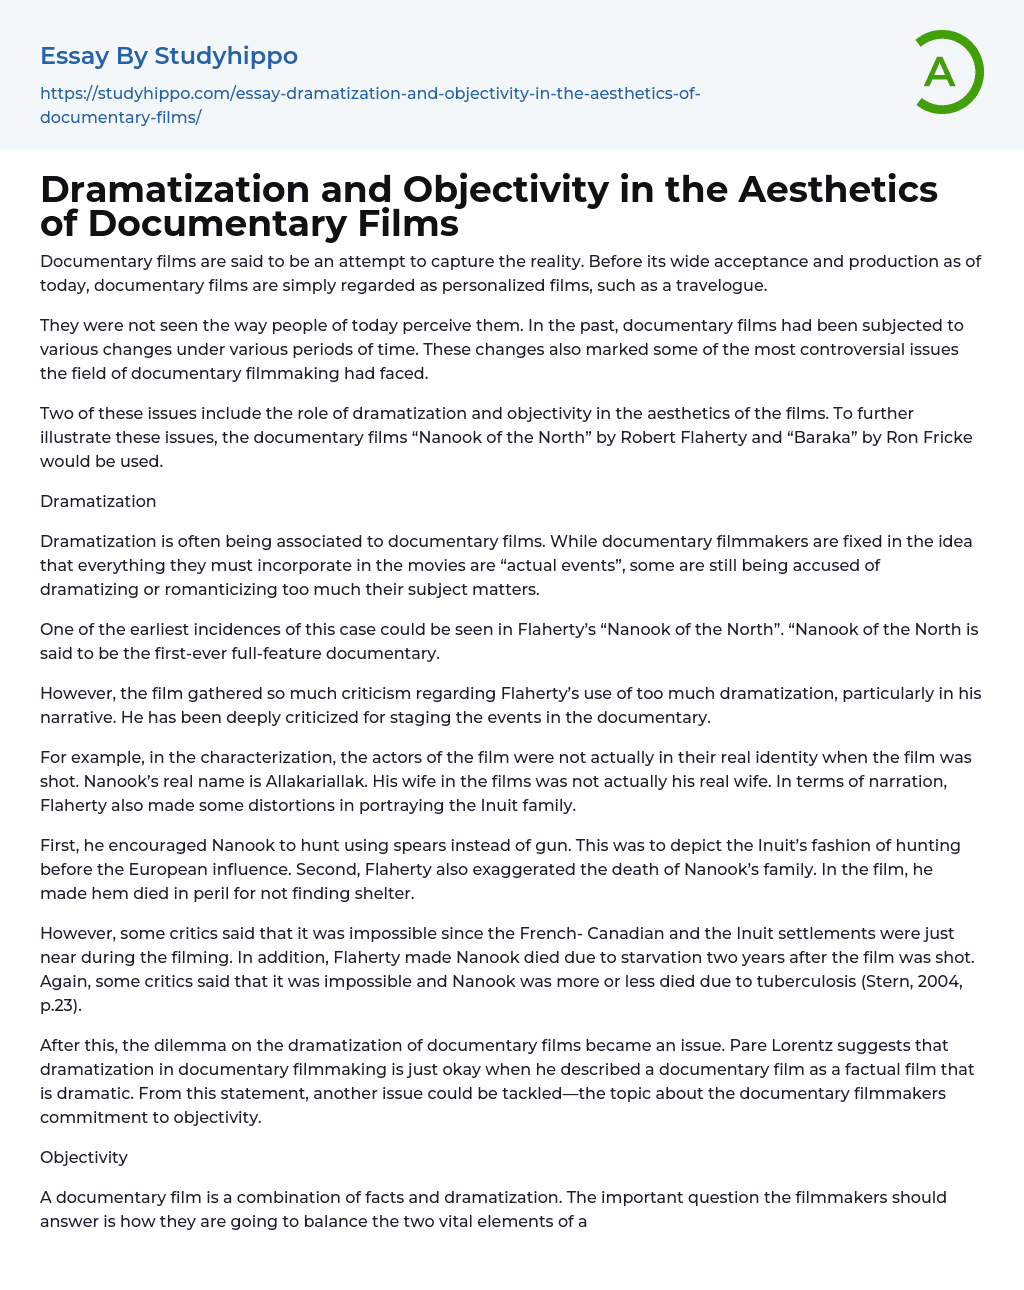 Dramatization and Objectivity in the Aesthetics of Documentary Films Essay Example